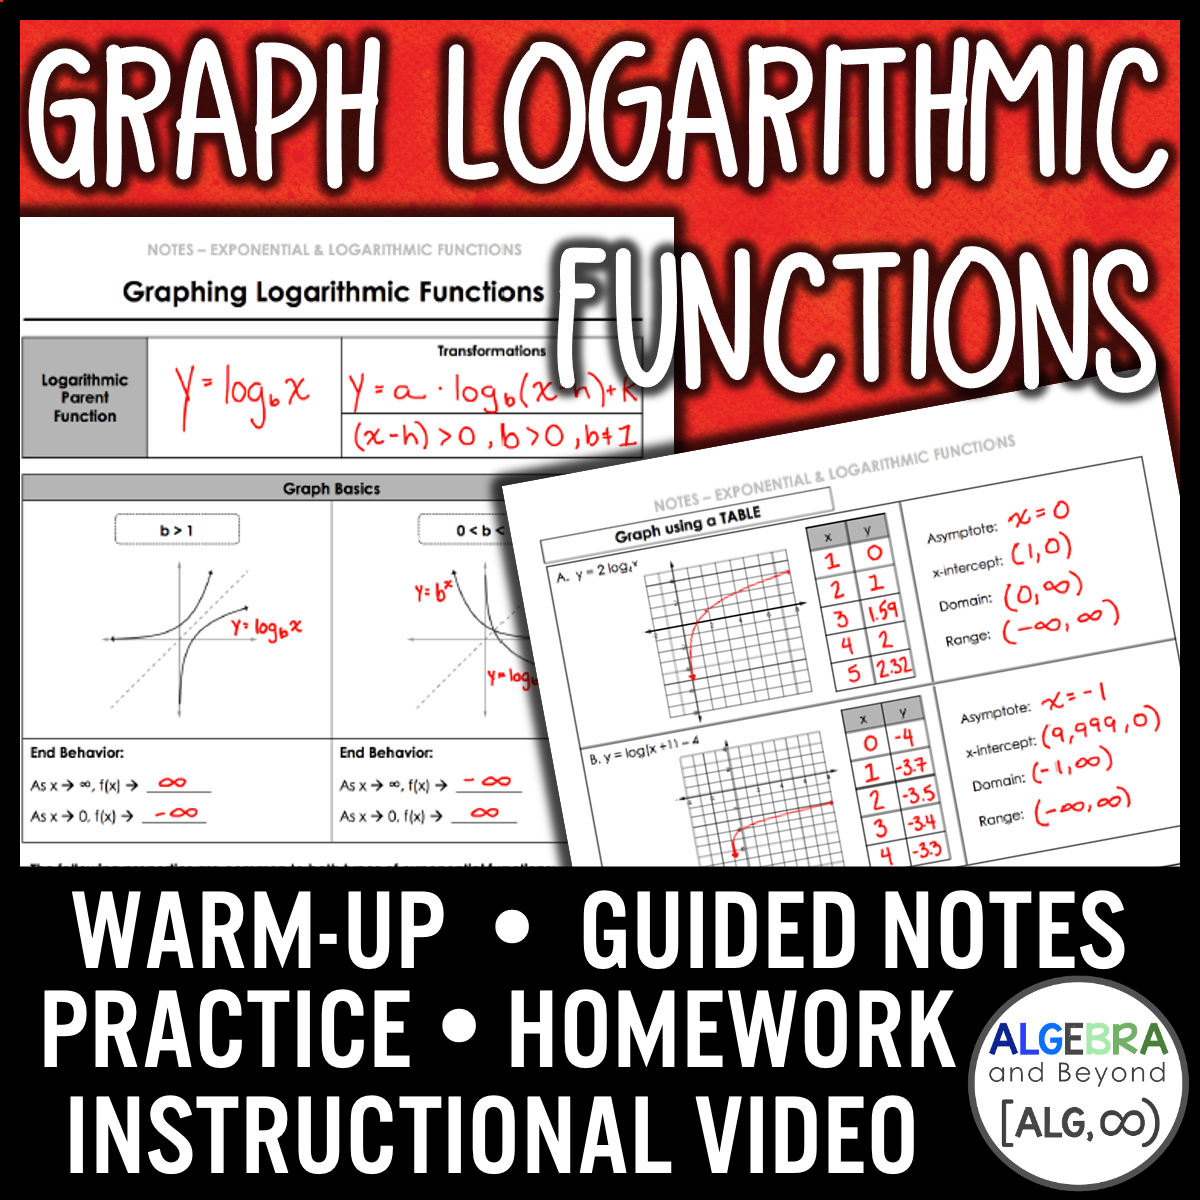 Graph Logarithmic Functions Lesson | Video | Guided Notes | Homework